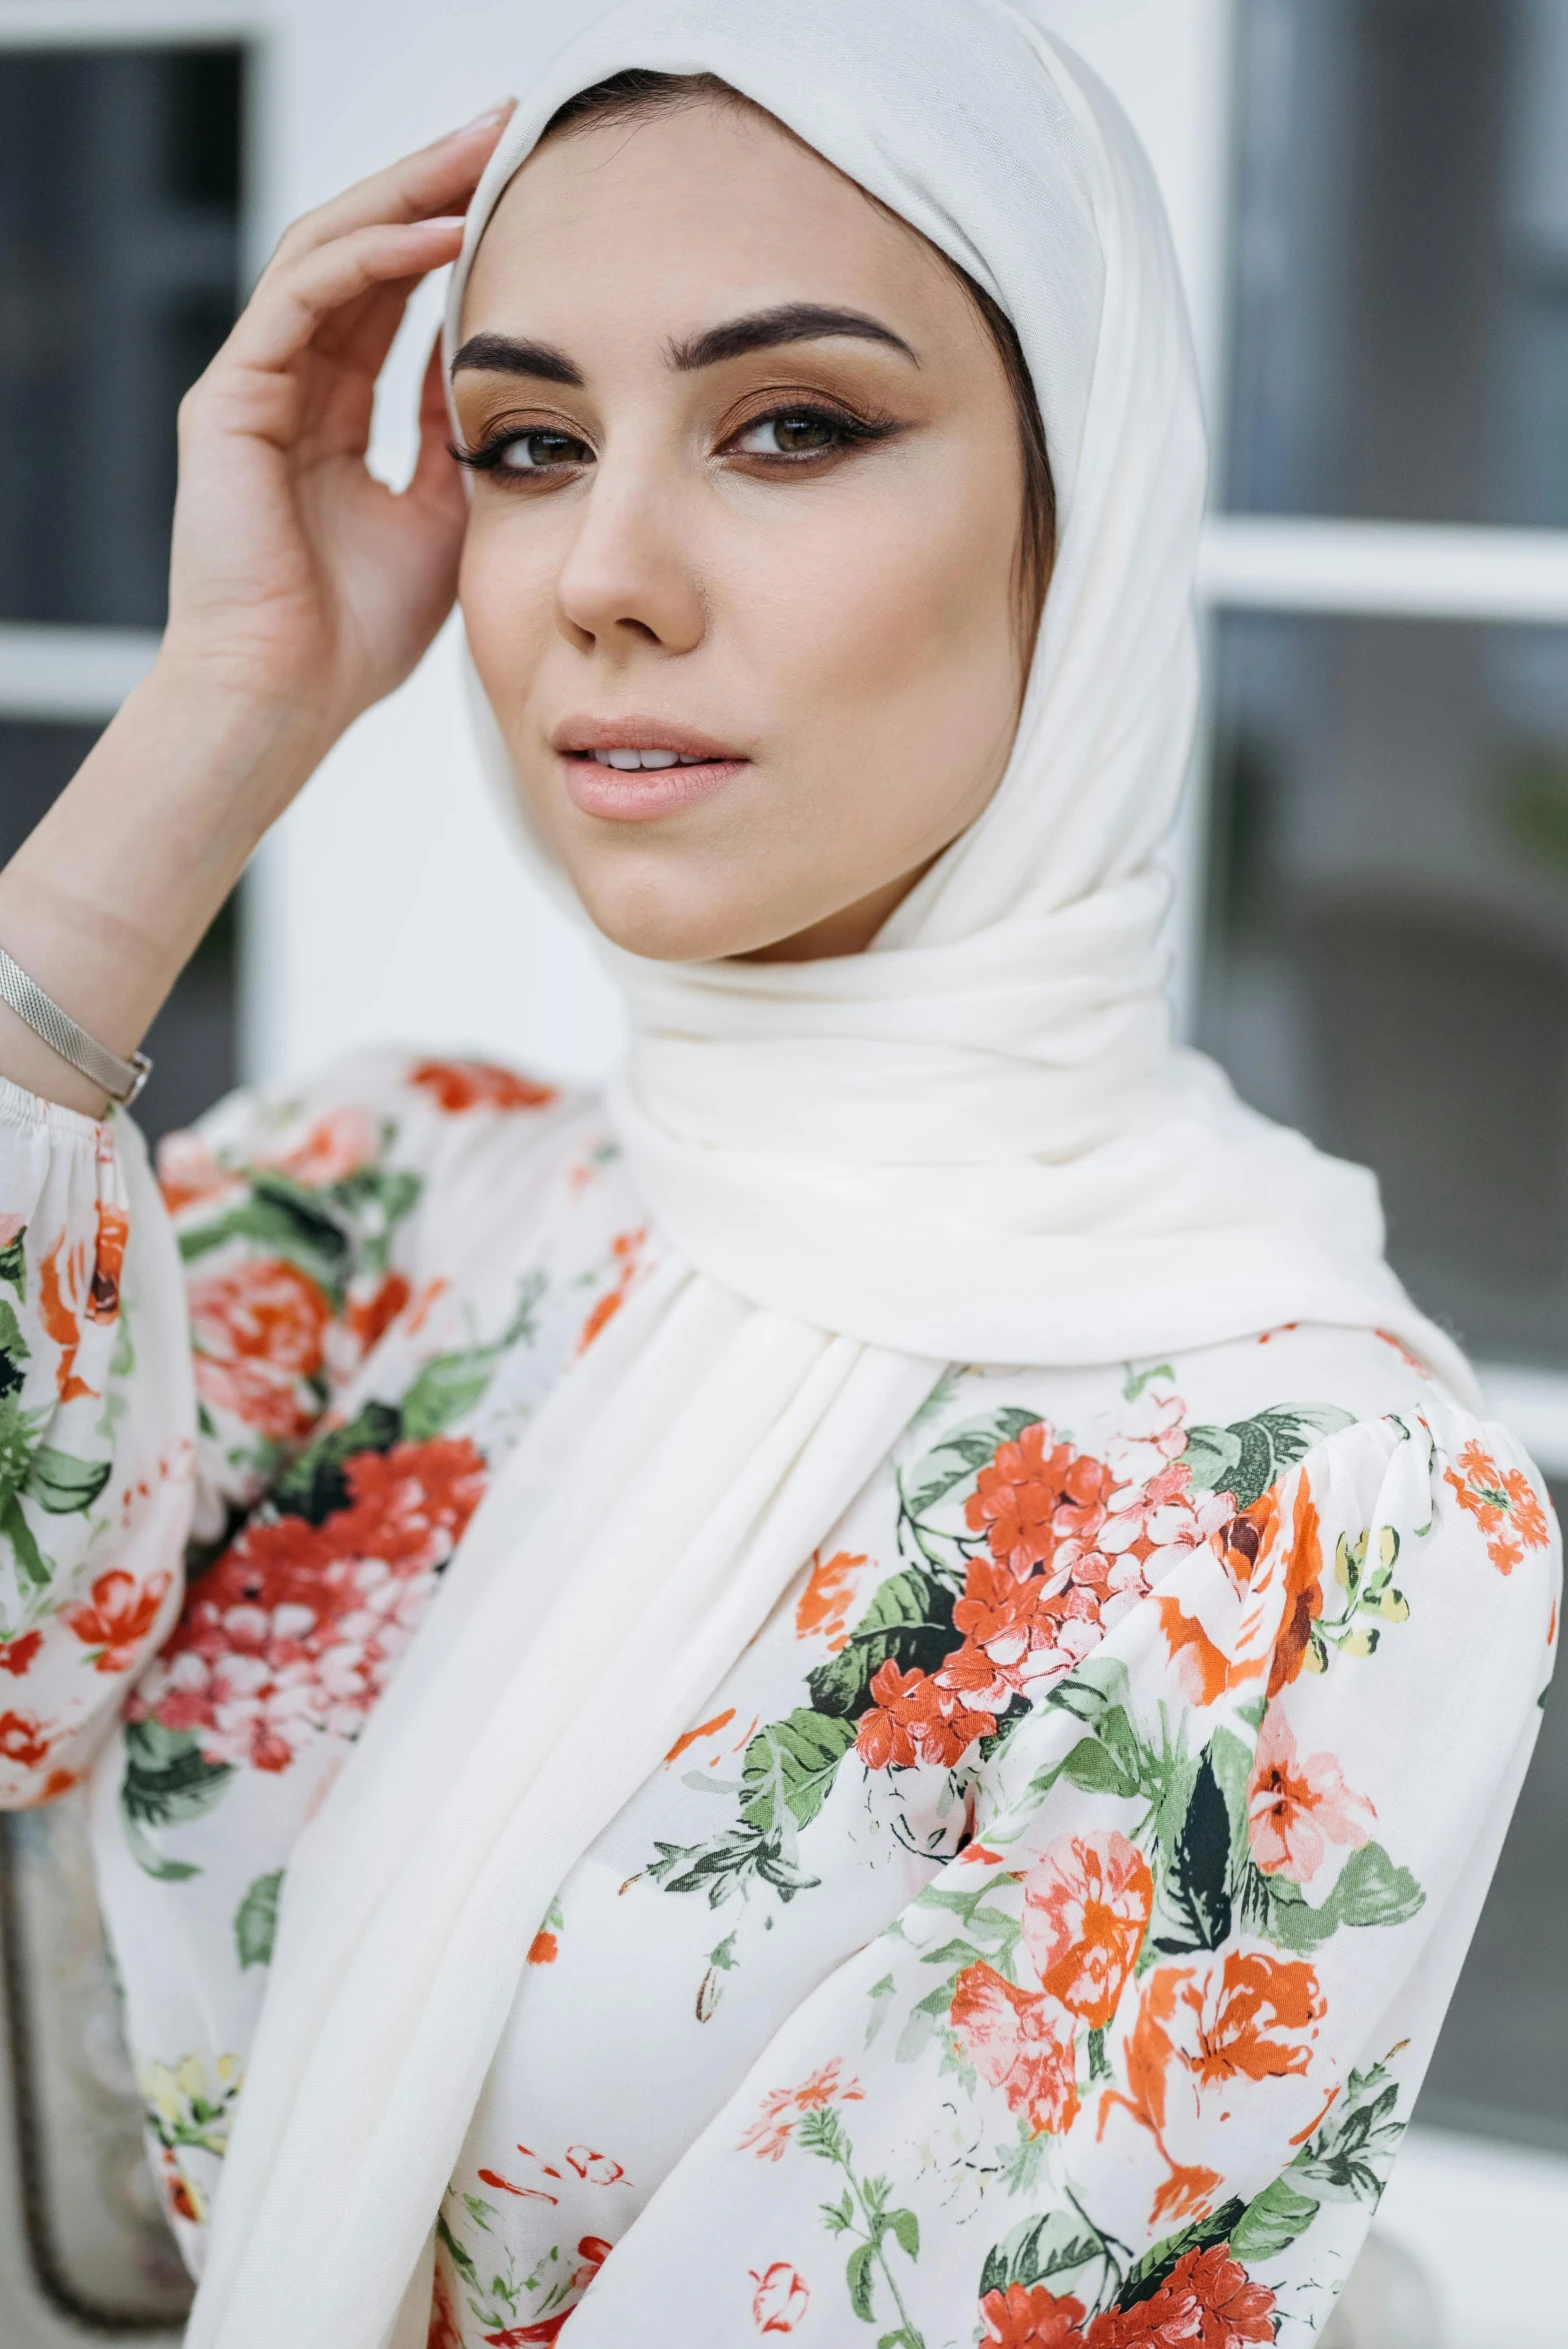 a woman wearing a floral top and head scarf